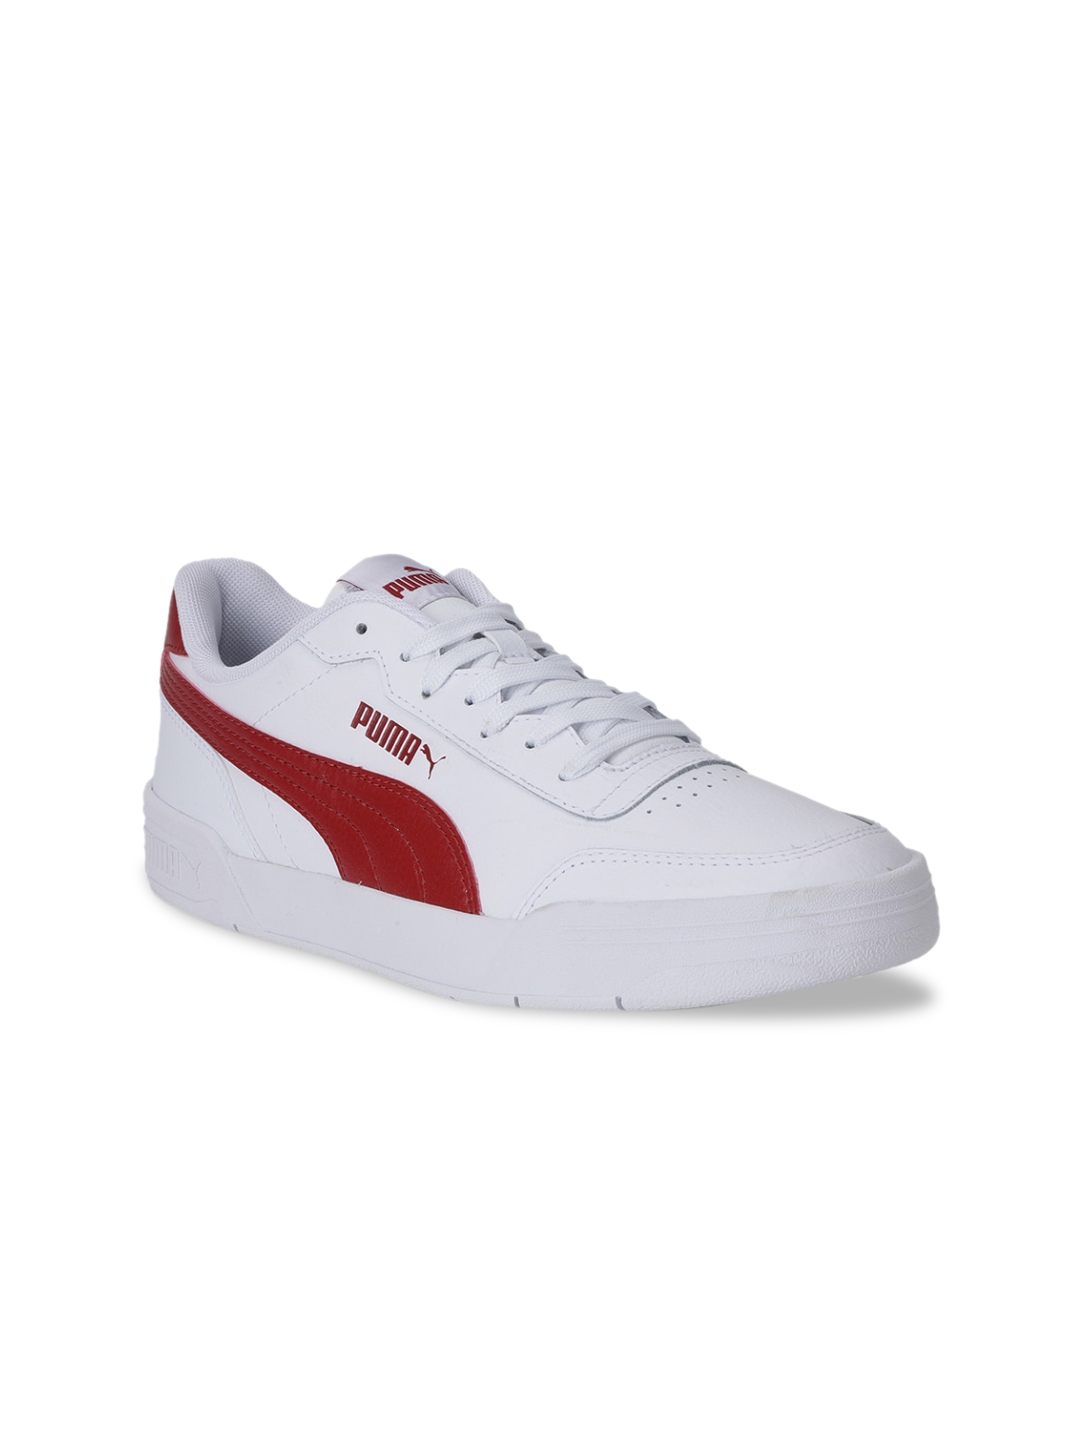 Buy Puma Unisex White Synthetic Training Or Gym Shoes - Casual Shoes ...